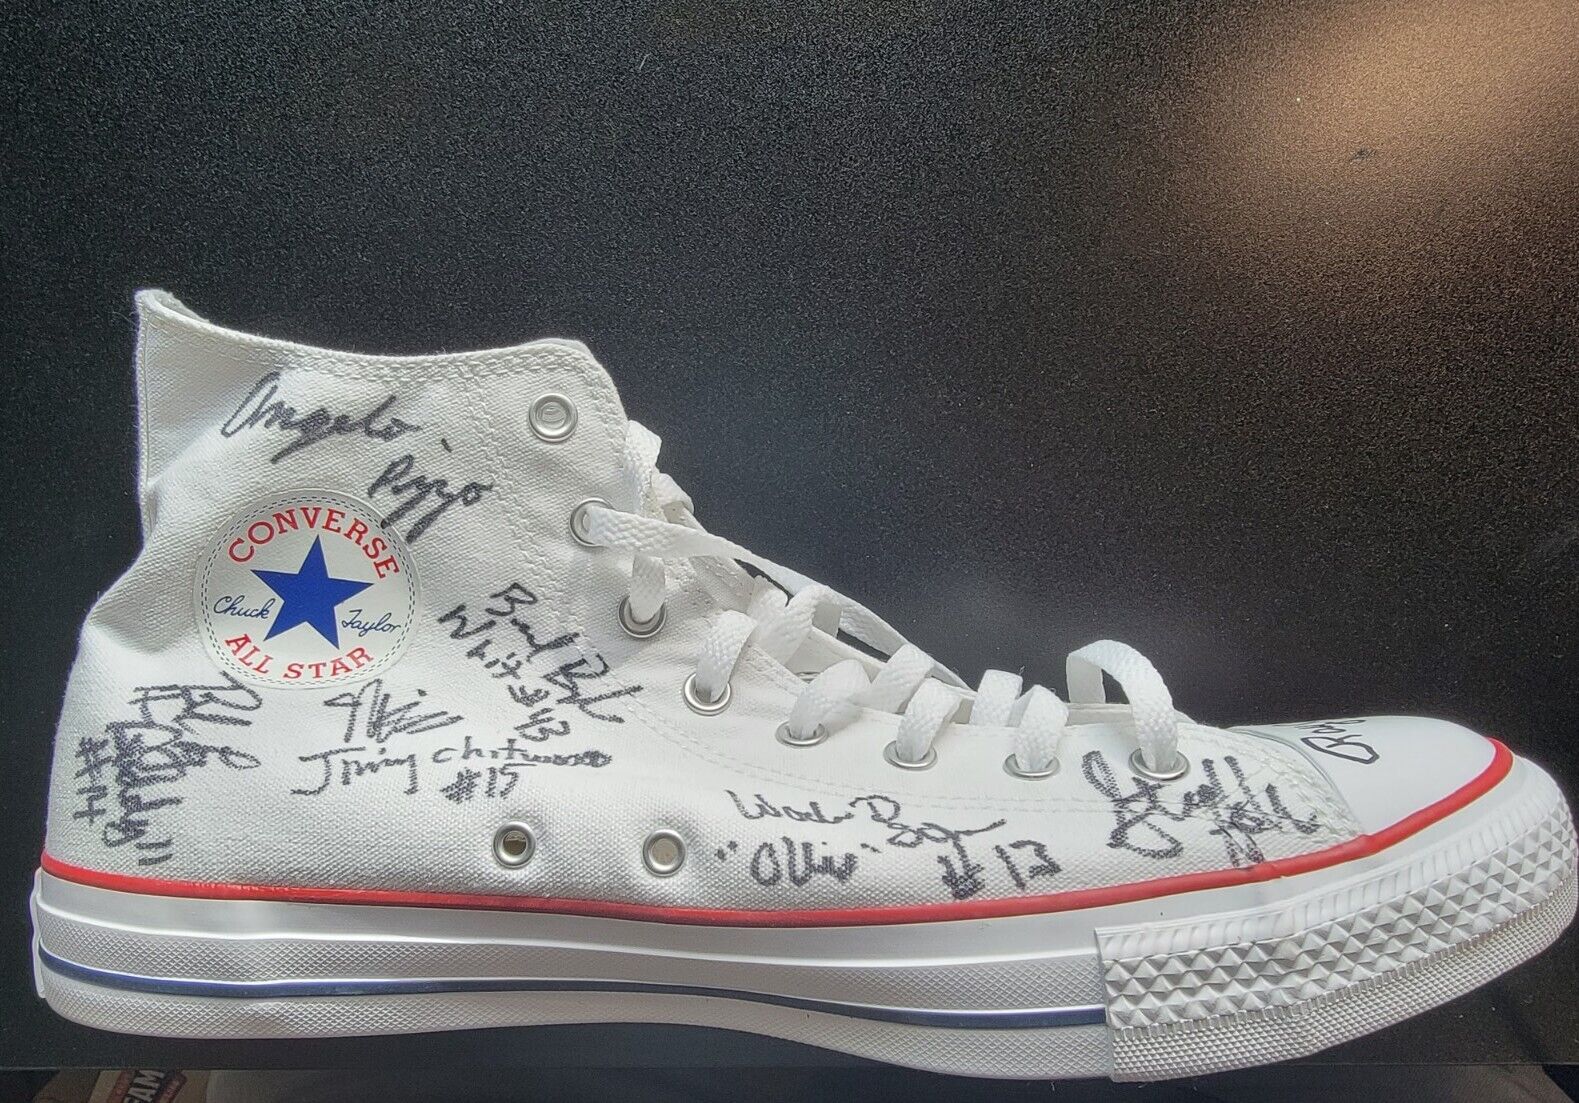 Hoosiers Cast Signed By 10 Converse Tennis Shoe Maris Valainis Angelo Pizzo